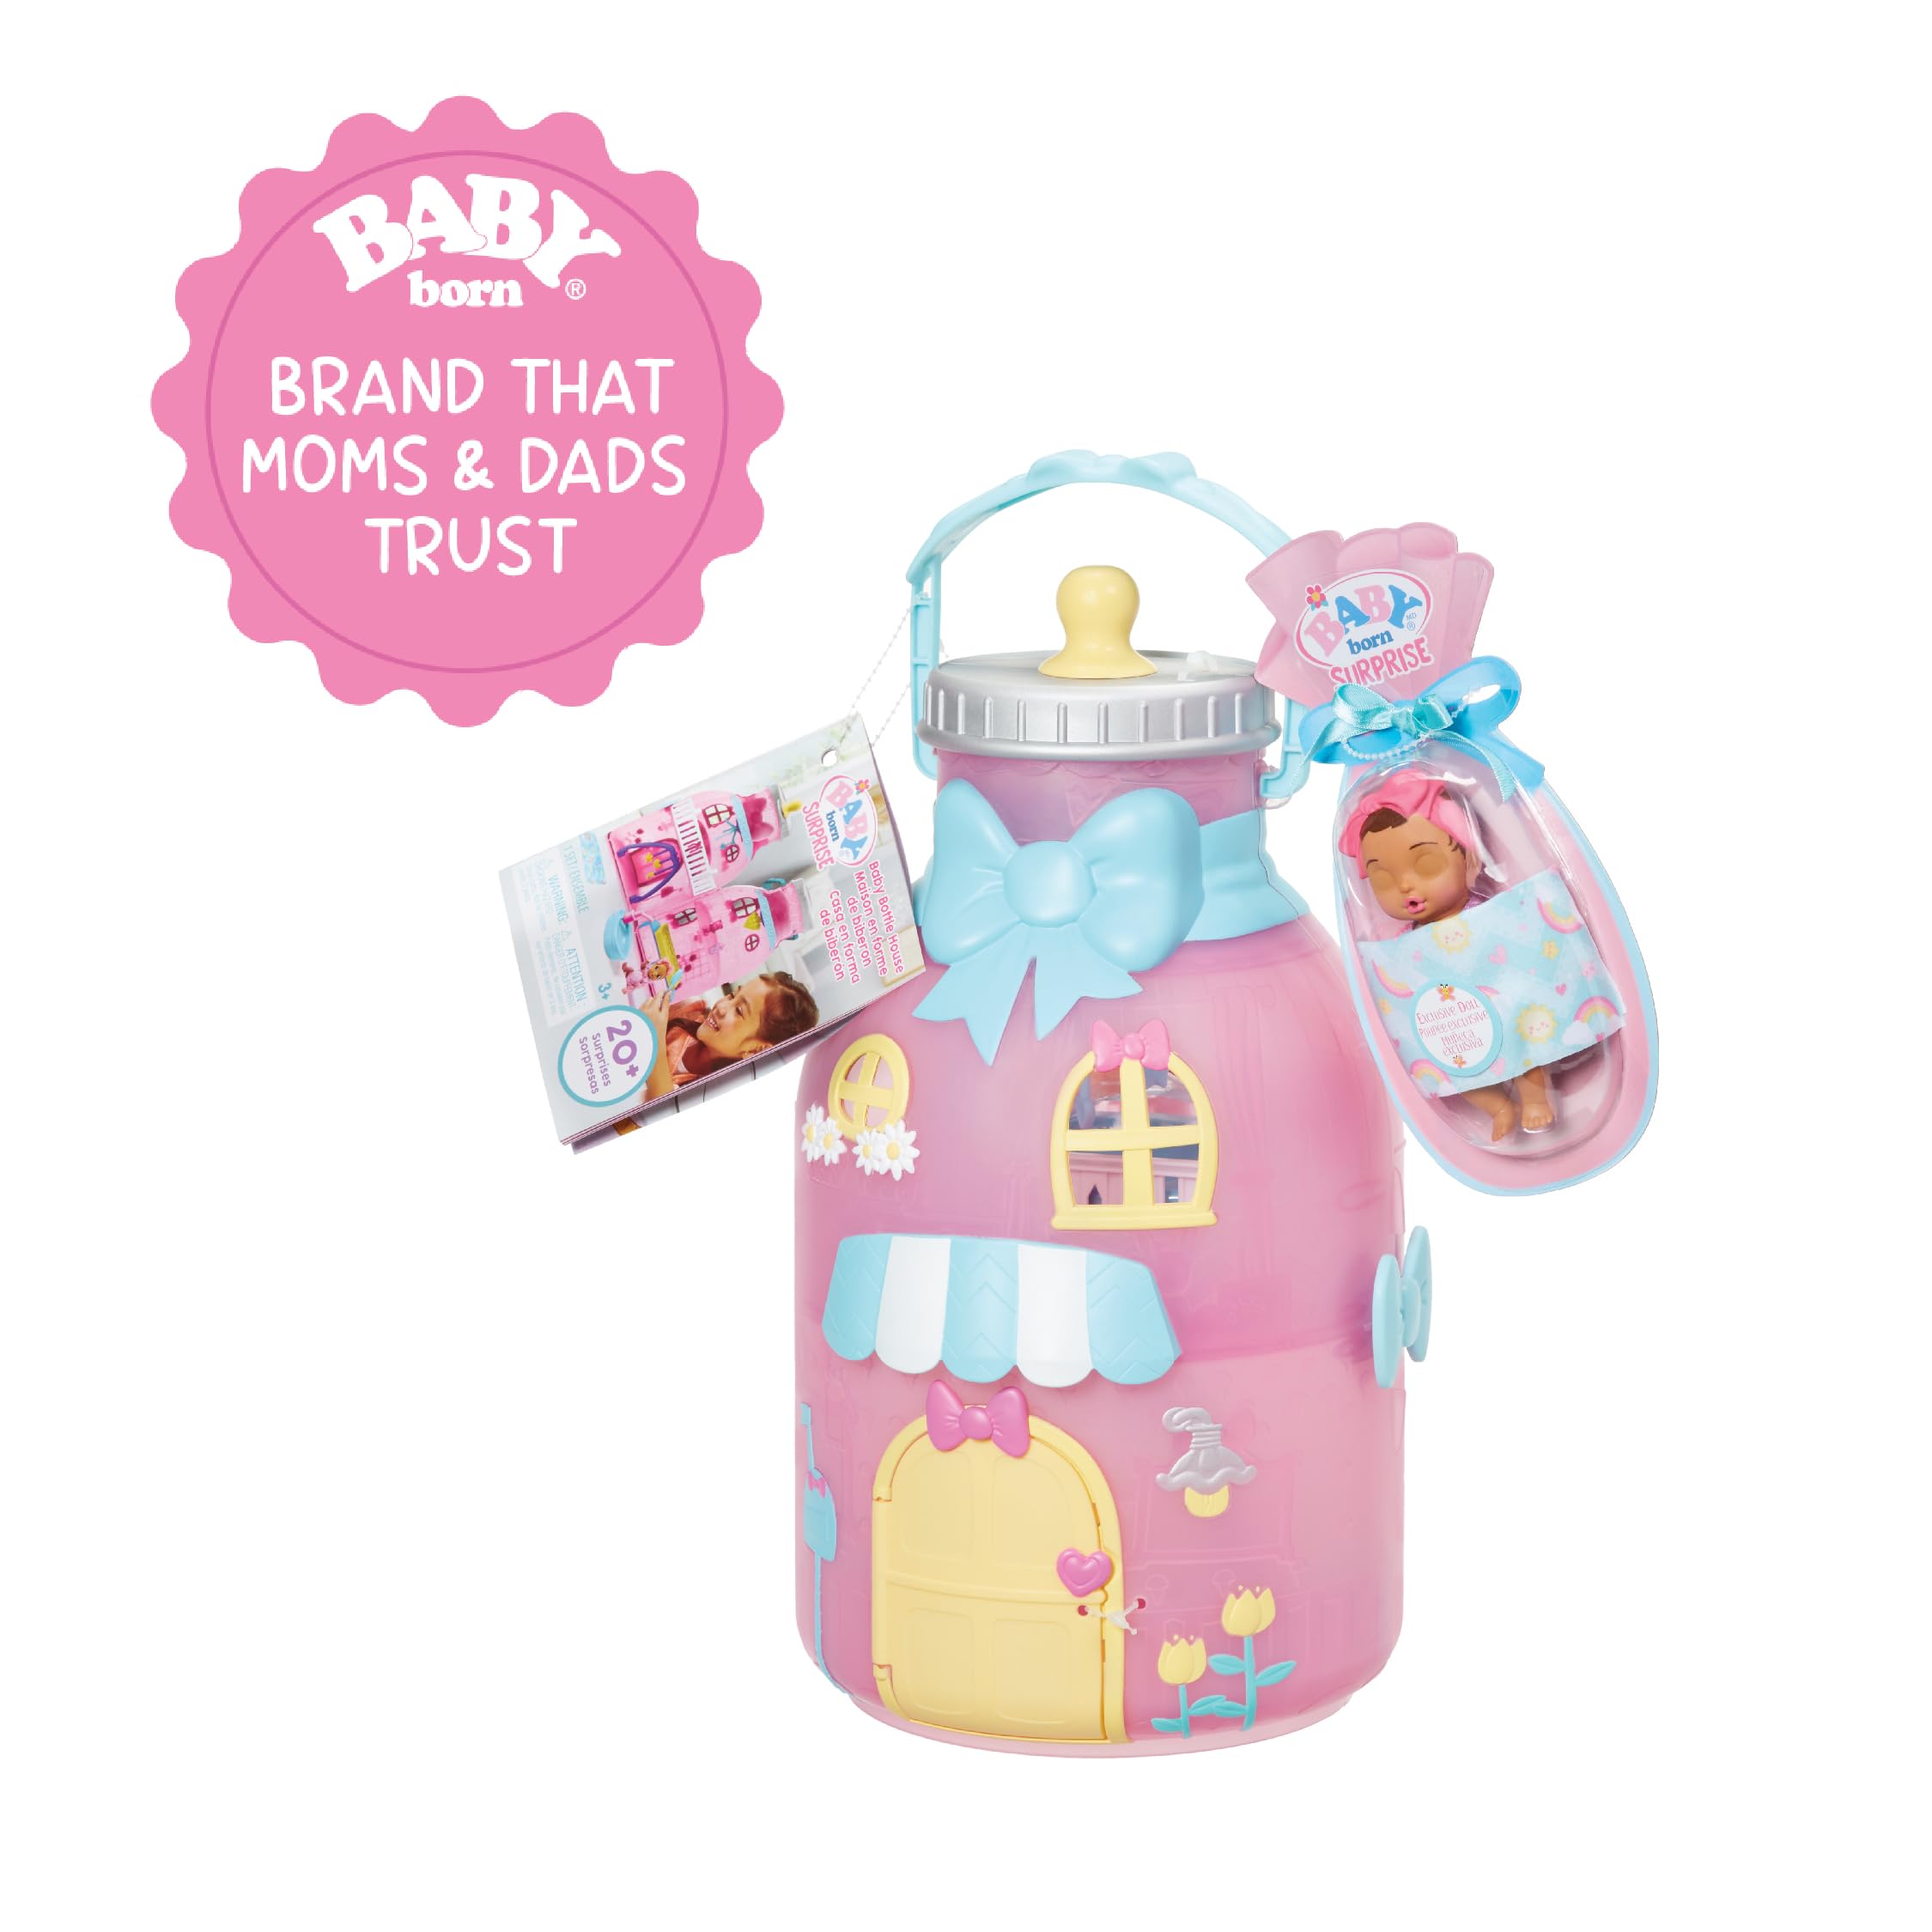 Baby Born Surprise Bottle House Playset with Exclusive Doll - Discover 20+ Surprises, 2 Levels of Play, 6 Rooms to Explore, for Kids Ages 3 and Up